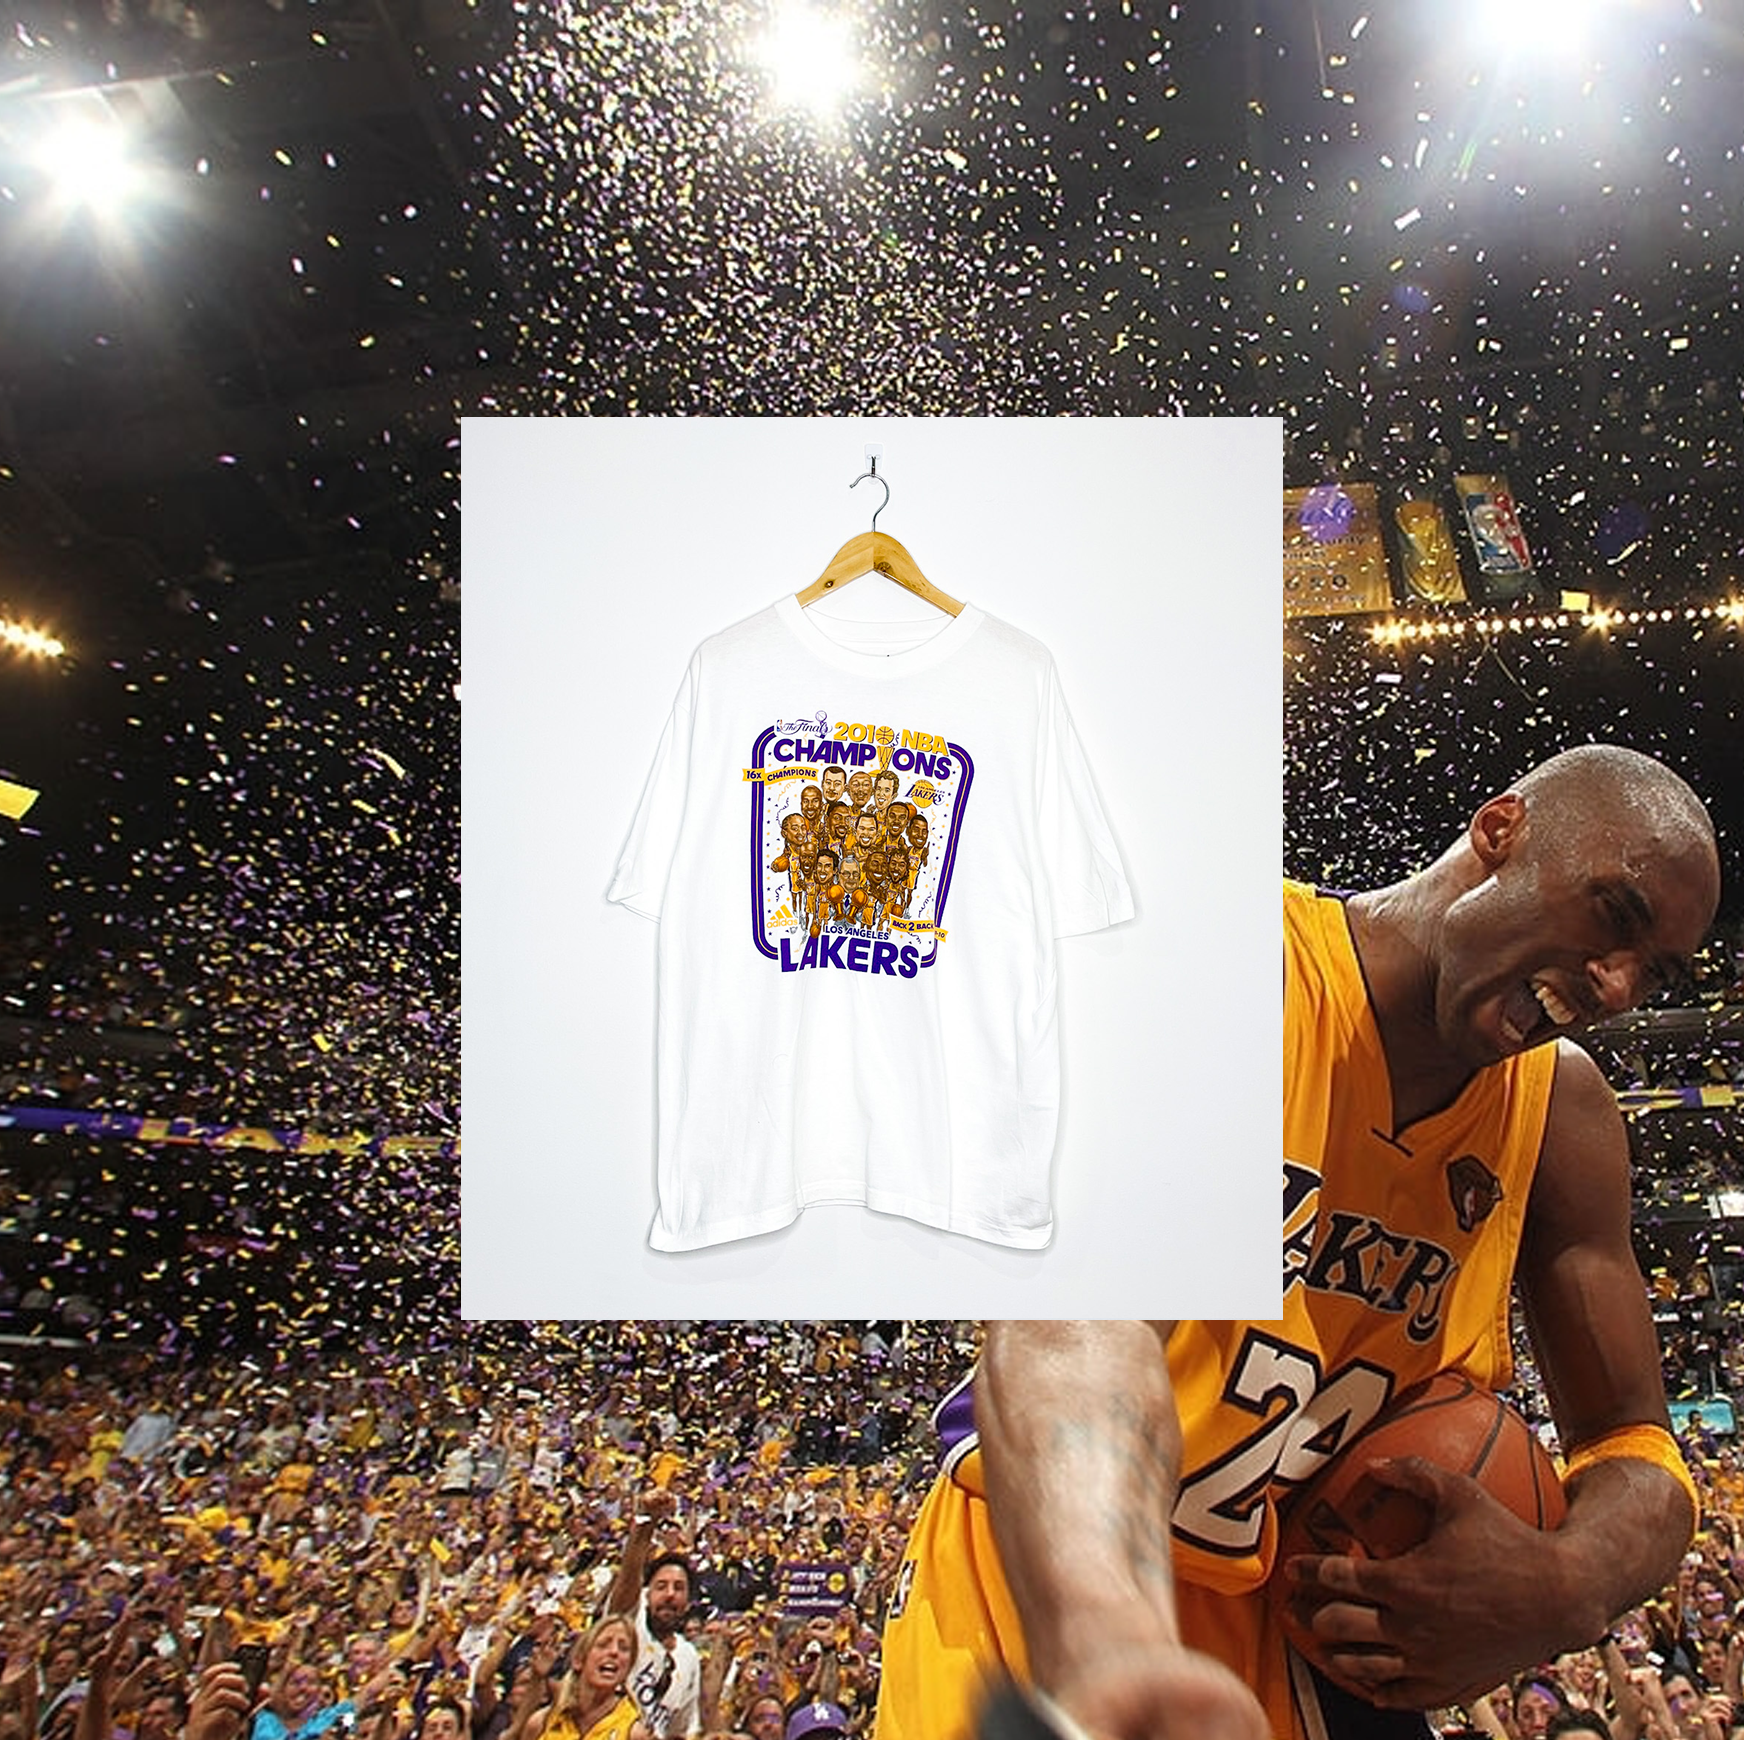 LOS ANGELES LAKERS "2010 NBA Champions" CARICATURE TEE